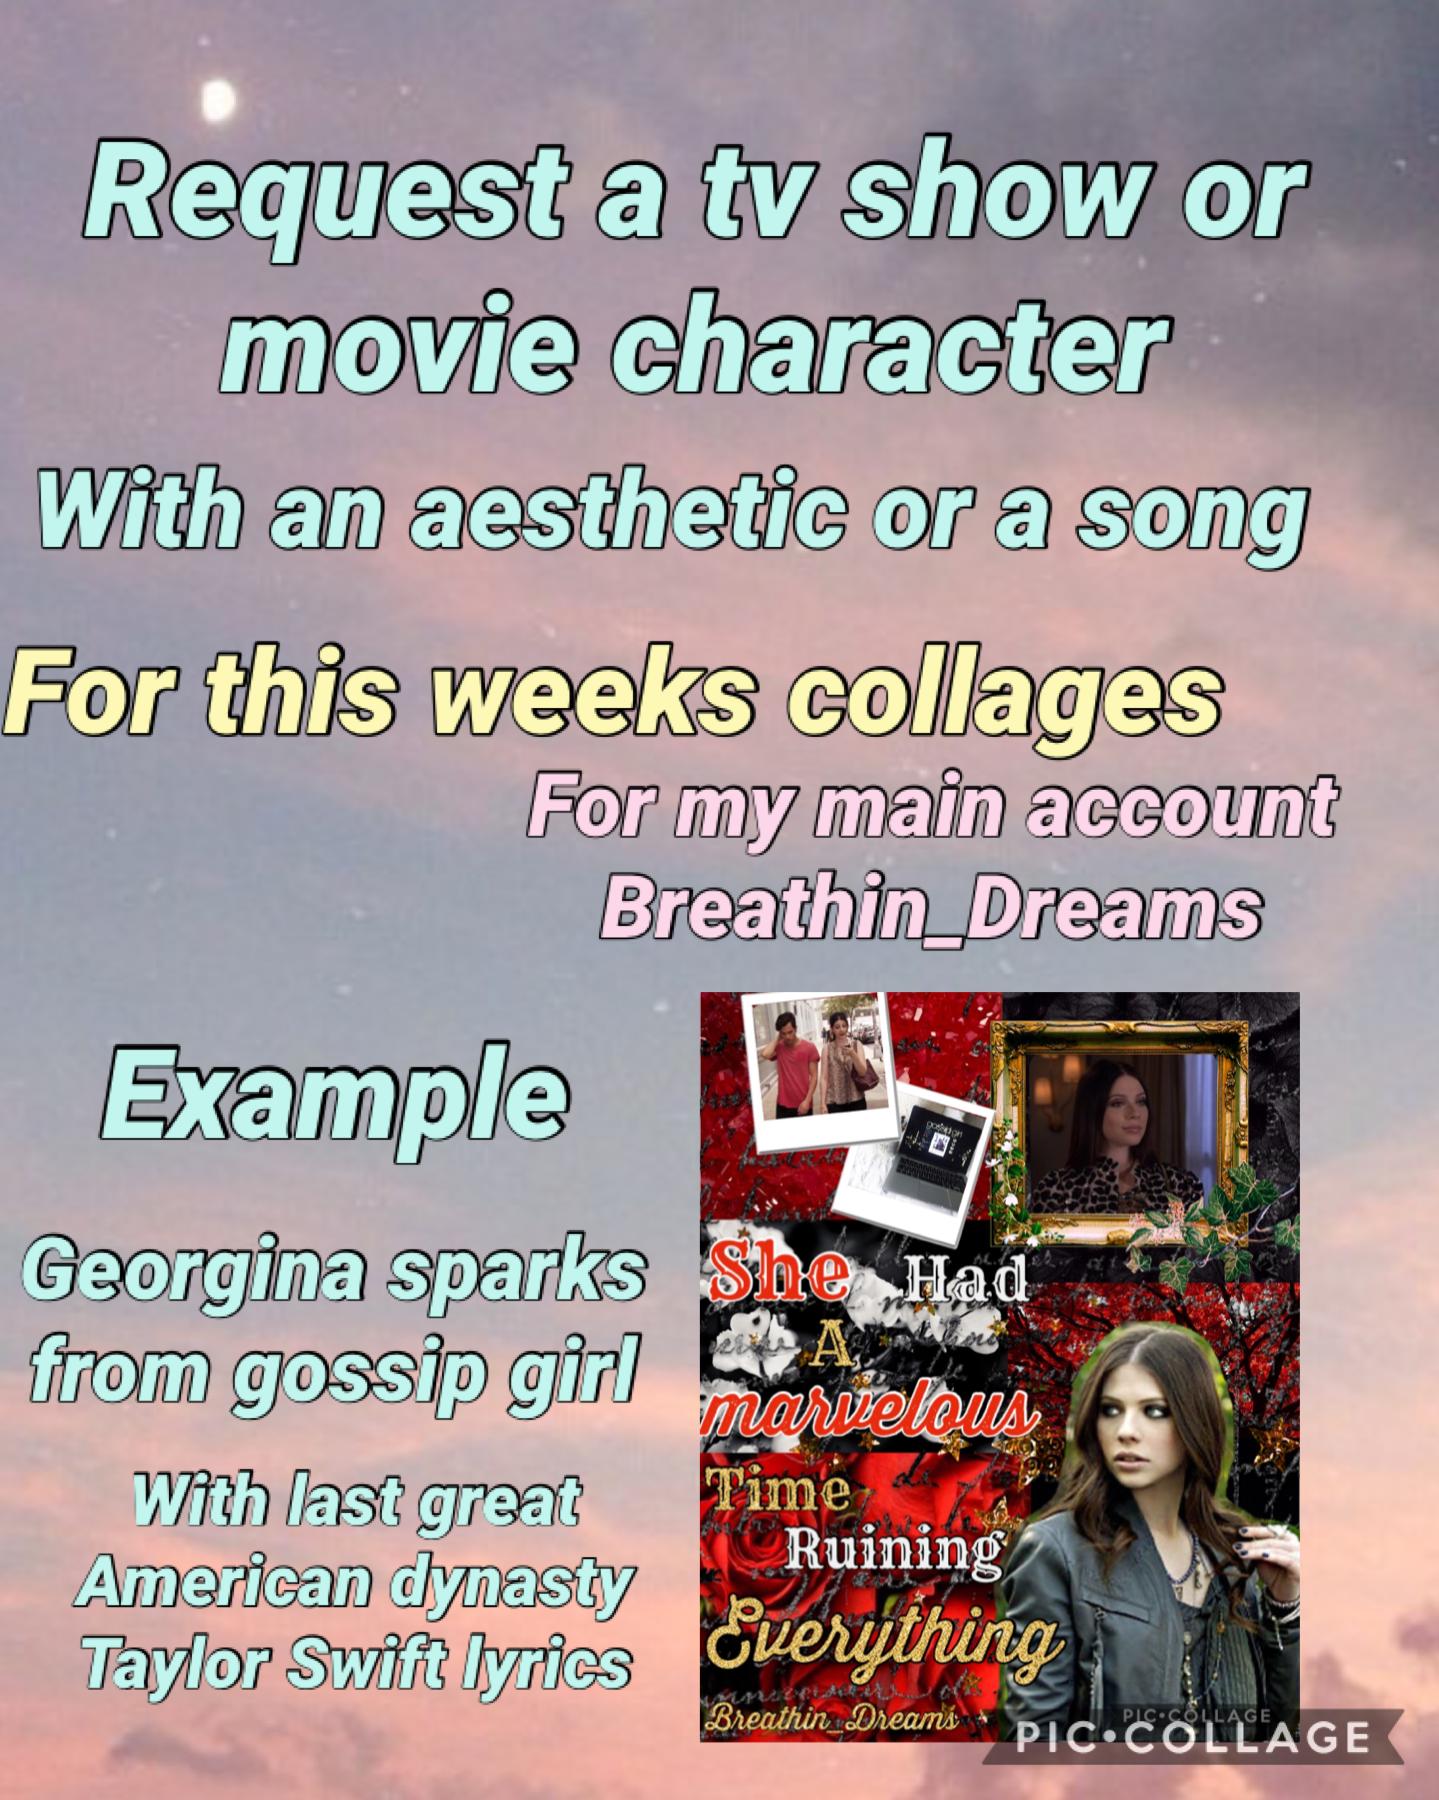 Request a tv show or movie character for this weeks collages for my main account Breathin_Dreams